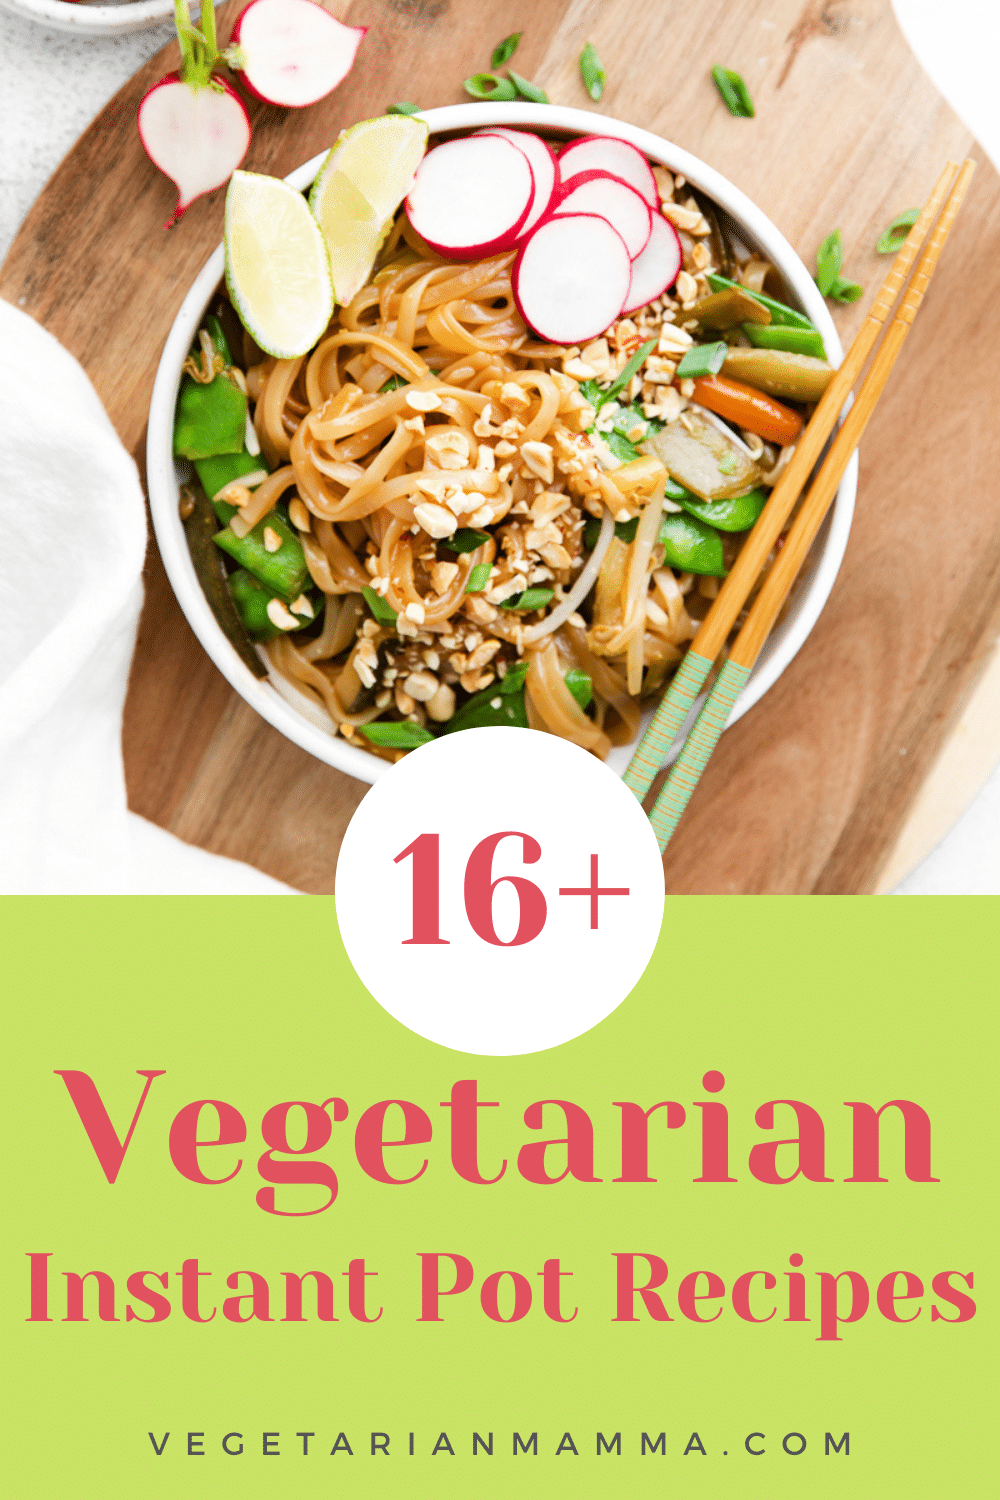 text overlay: 16 vegetarian instant pot dinners pictured is a white bowl with noodles, vegetasbles, chopped peanuts and chopsticks